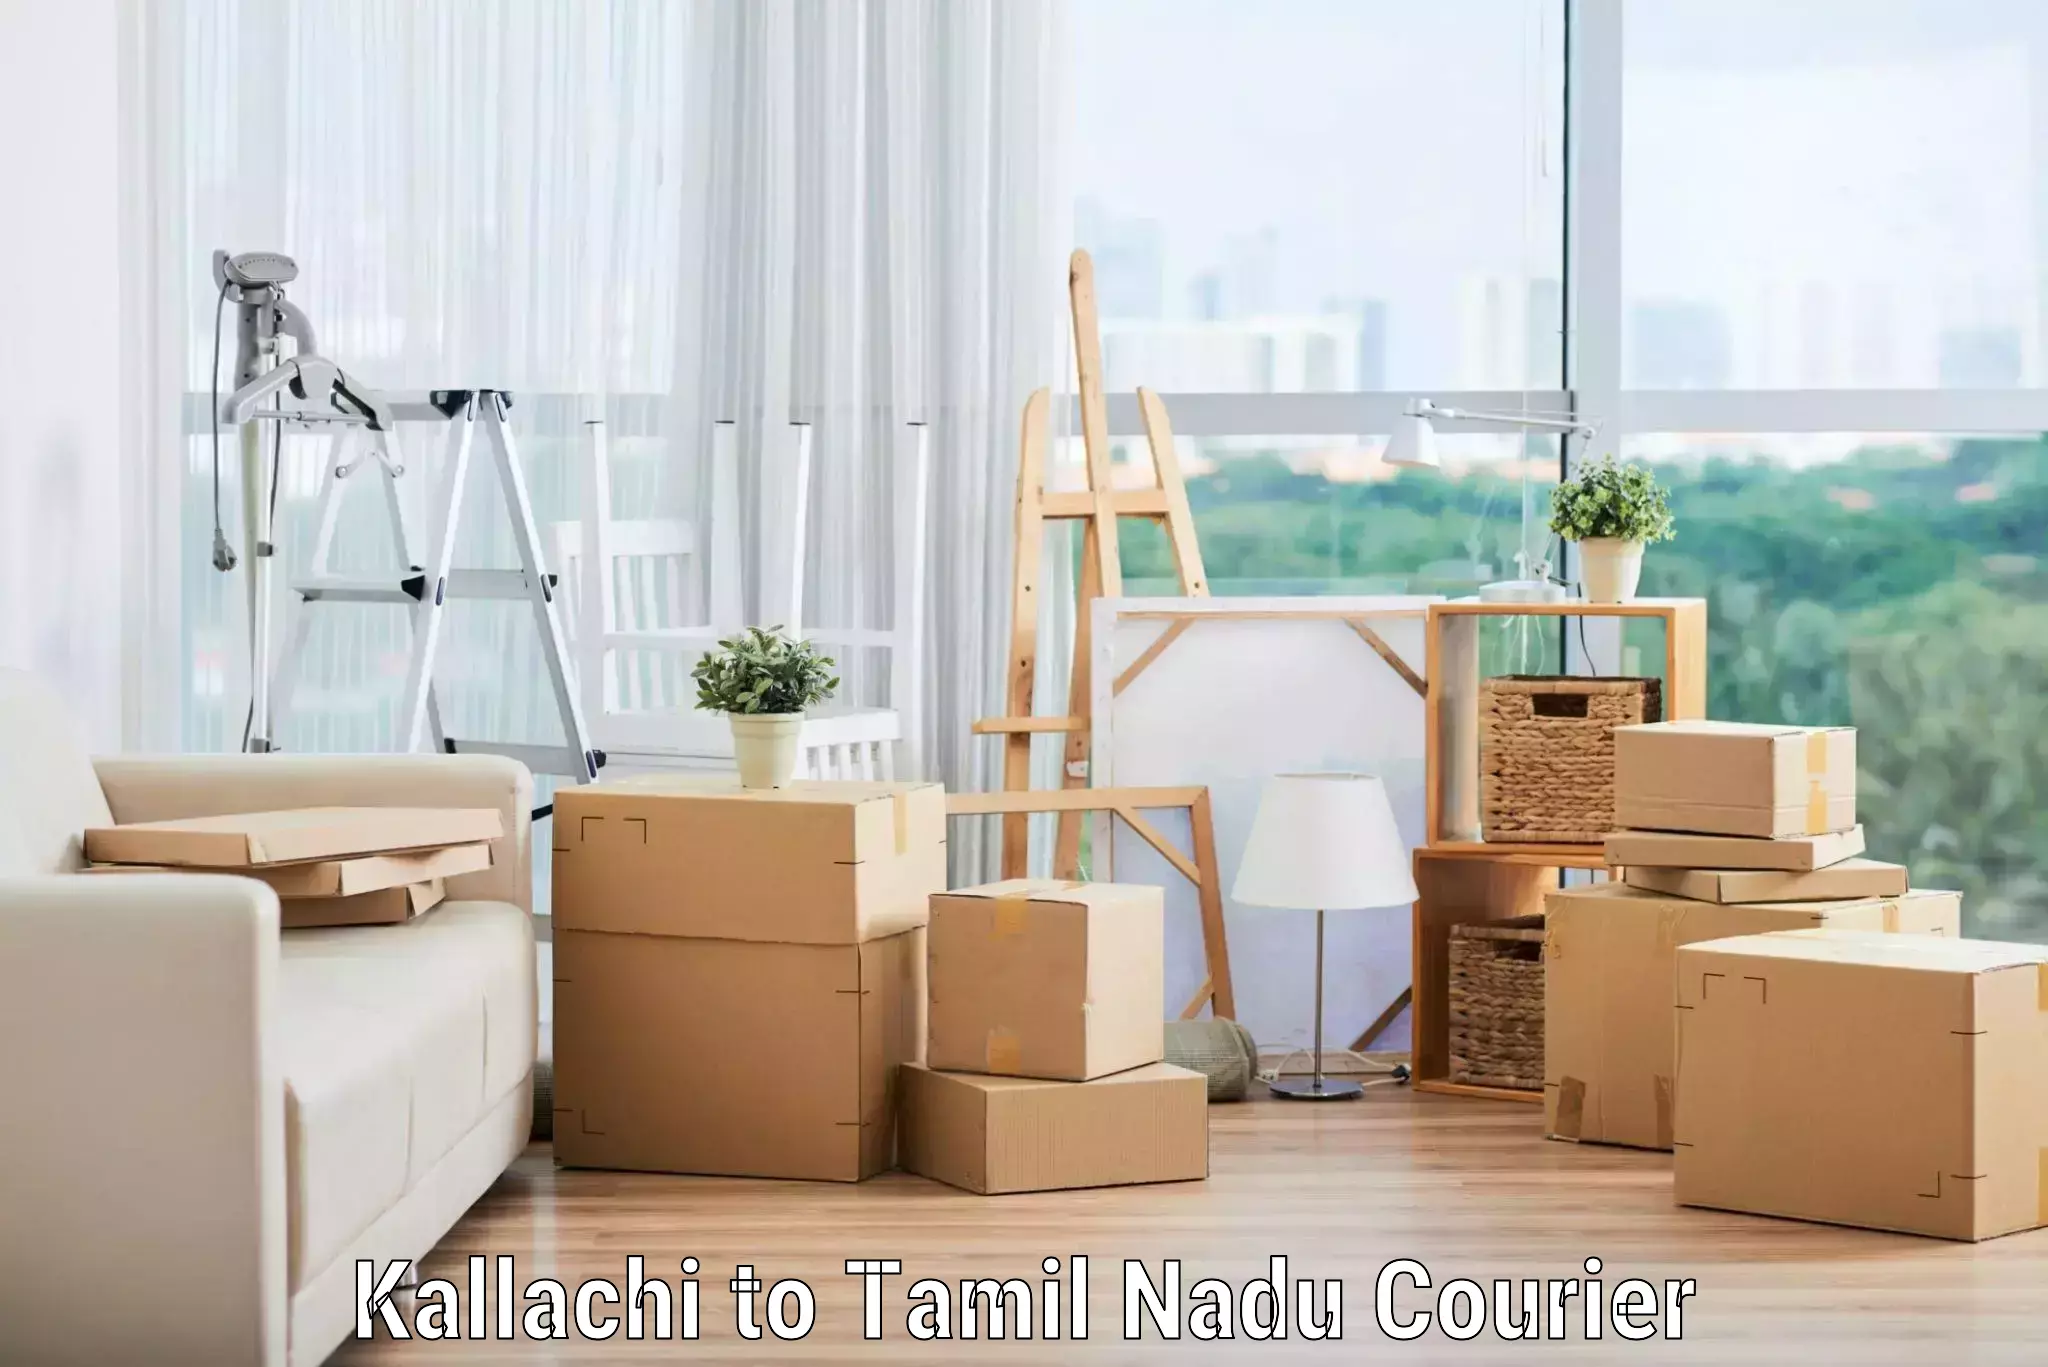 Affordable home movers Kallachi to Ennore Port Chennai